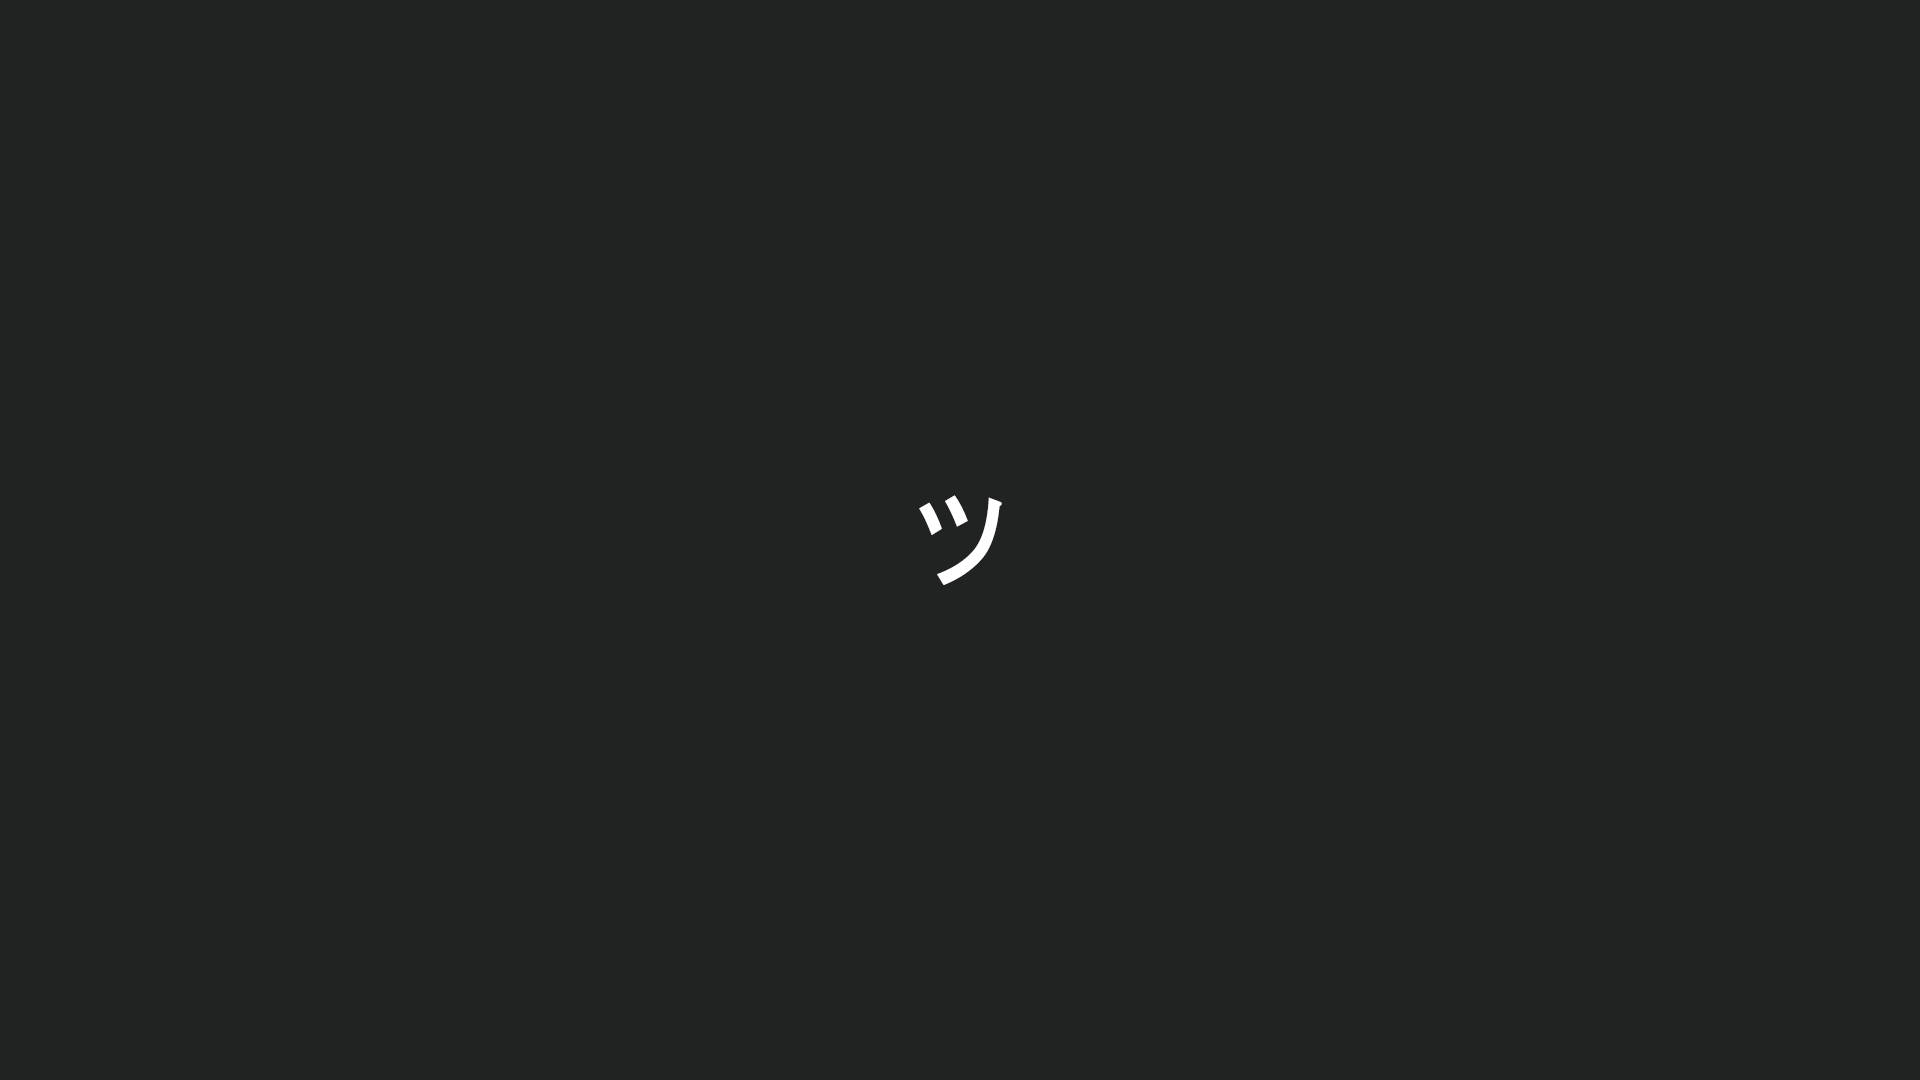 Download Smiley Black Aesthetic Tumblr And Laptop Wallpaper 